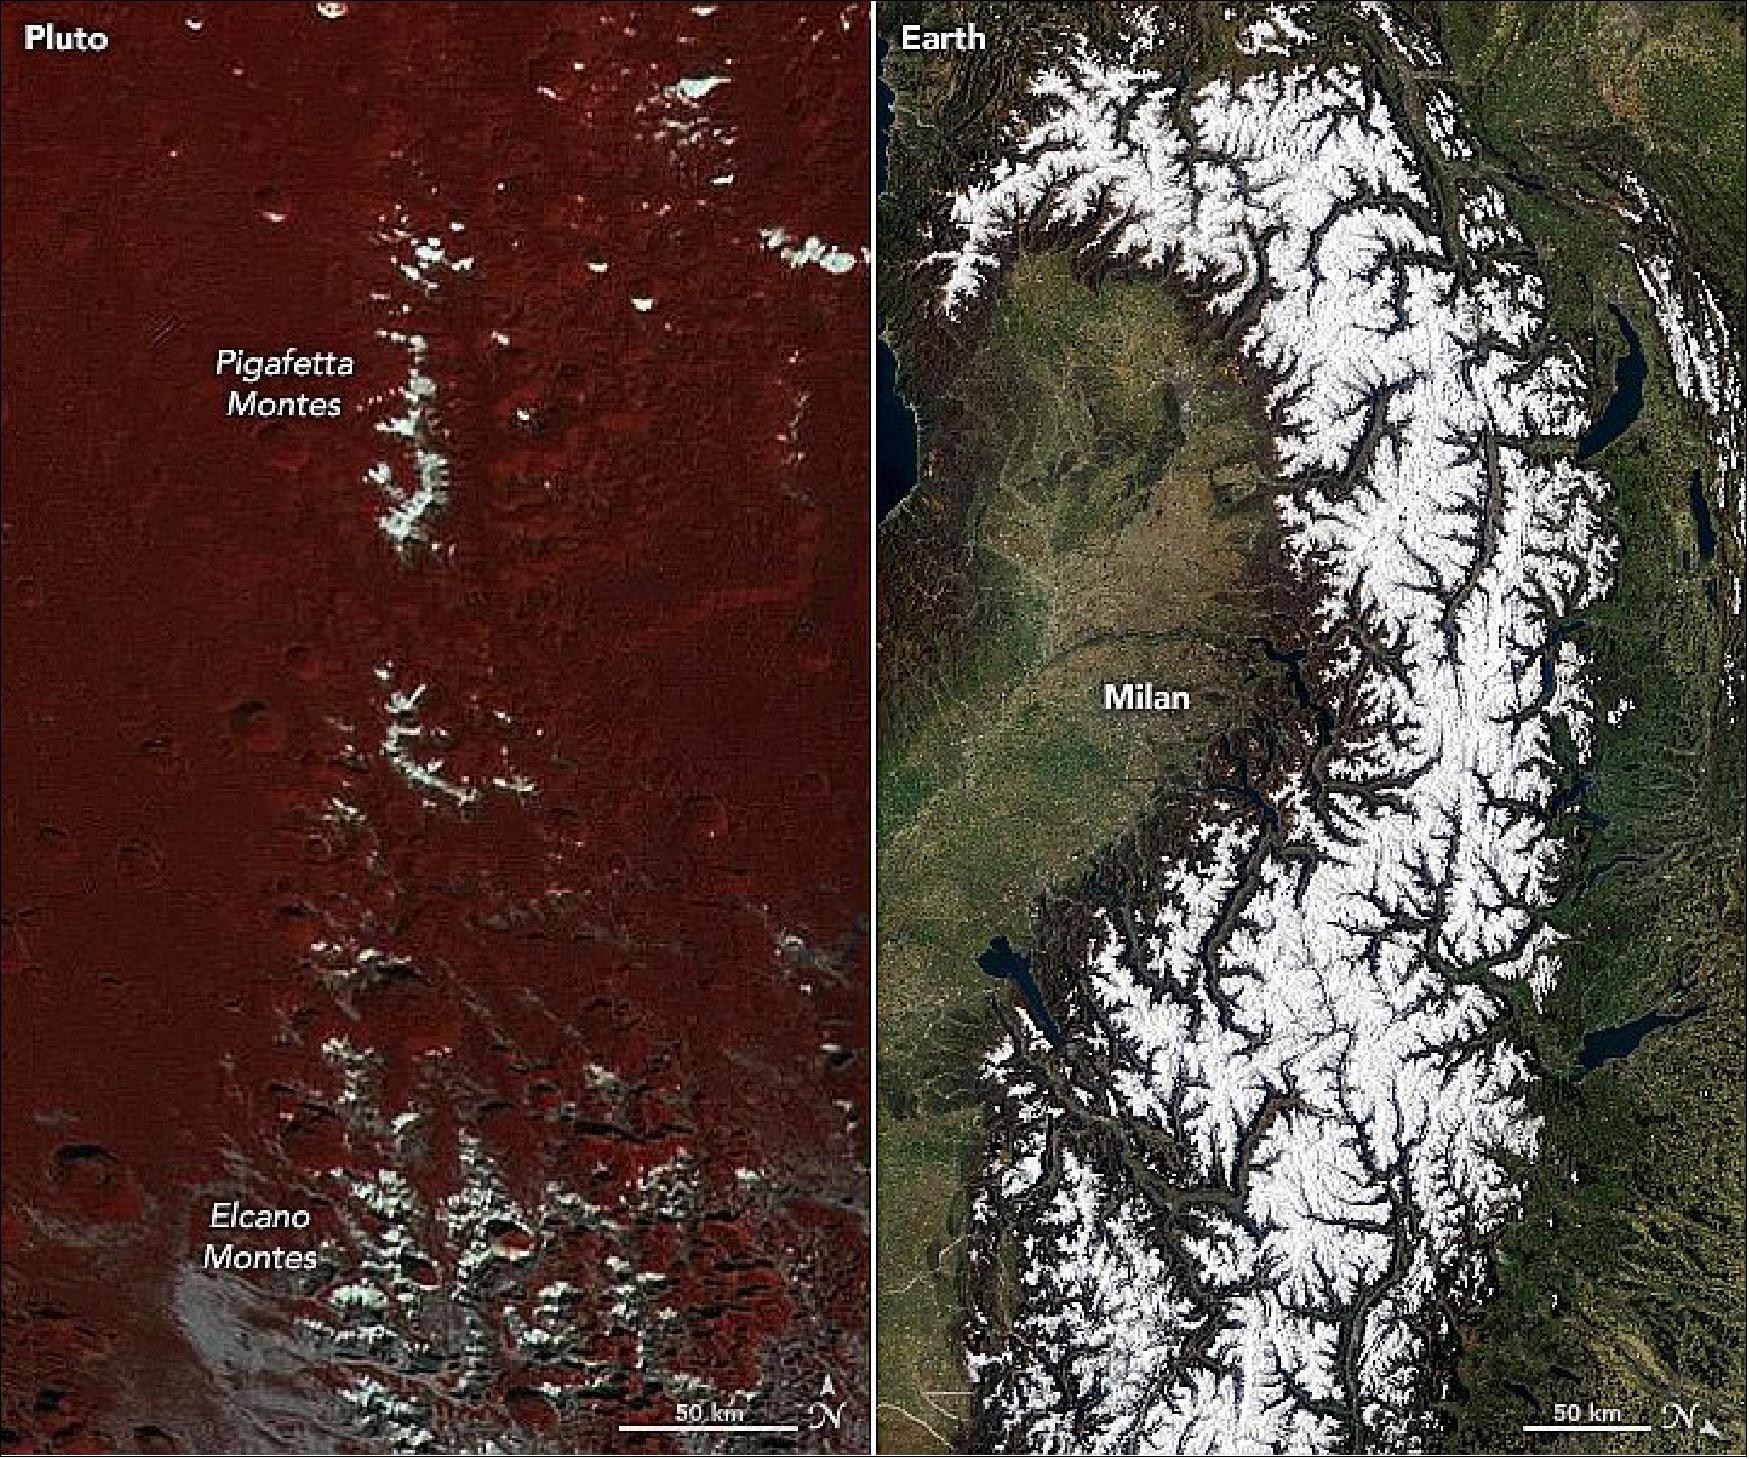 Figure 23: The image on the left was acquired on July 14, 2015, when the New Horizons spacecraft approached Pluto. The Long-Range Reconnaissance Imager (LORRI) detected the presence of patchy bright deposits atop the Pigafetta Montes and Elcano Montes mountain ranges. The spacecraft’s Multispectral Visible Imaging Camera (data not shown) revealed signatures of methane. — The right image is a natural-color view of a section of the Alps range in Europe and was acquired by the Moderate Resolution Imaging Spectroradiometer (MODIS) on NASA’s Terra satellite on March 19, 2020 (image credit: NASA Earth Observatory image by Lauren Dauphin, using MODIS data from NASA EOSDIS/LANCE and GIBS/Worldview. Pluto imagery courtesy of NASA/Johns Hopkins University Applied Physics Laboratory/Southwest Research Institute. Story by Frank Tavares, NASA Ames, with Mike Carlowicz)